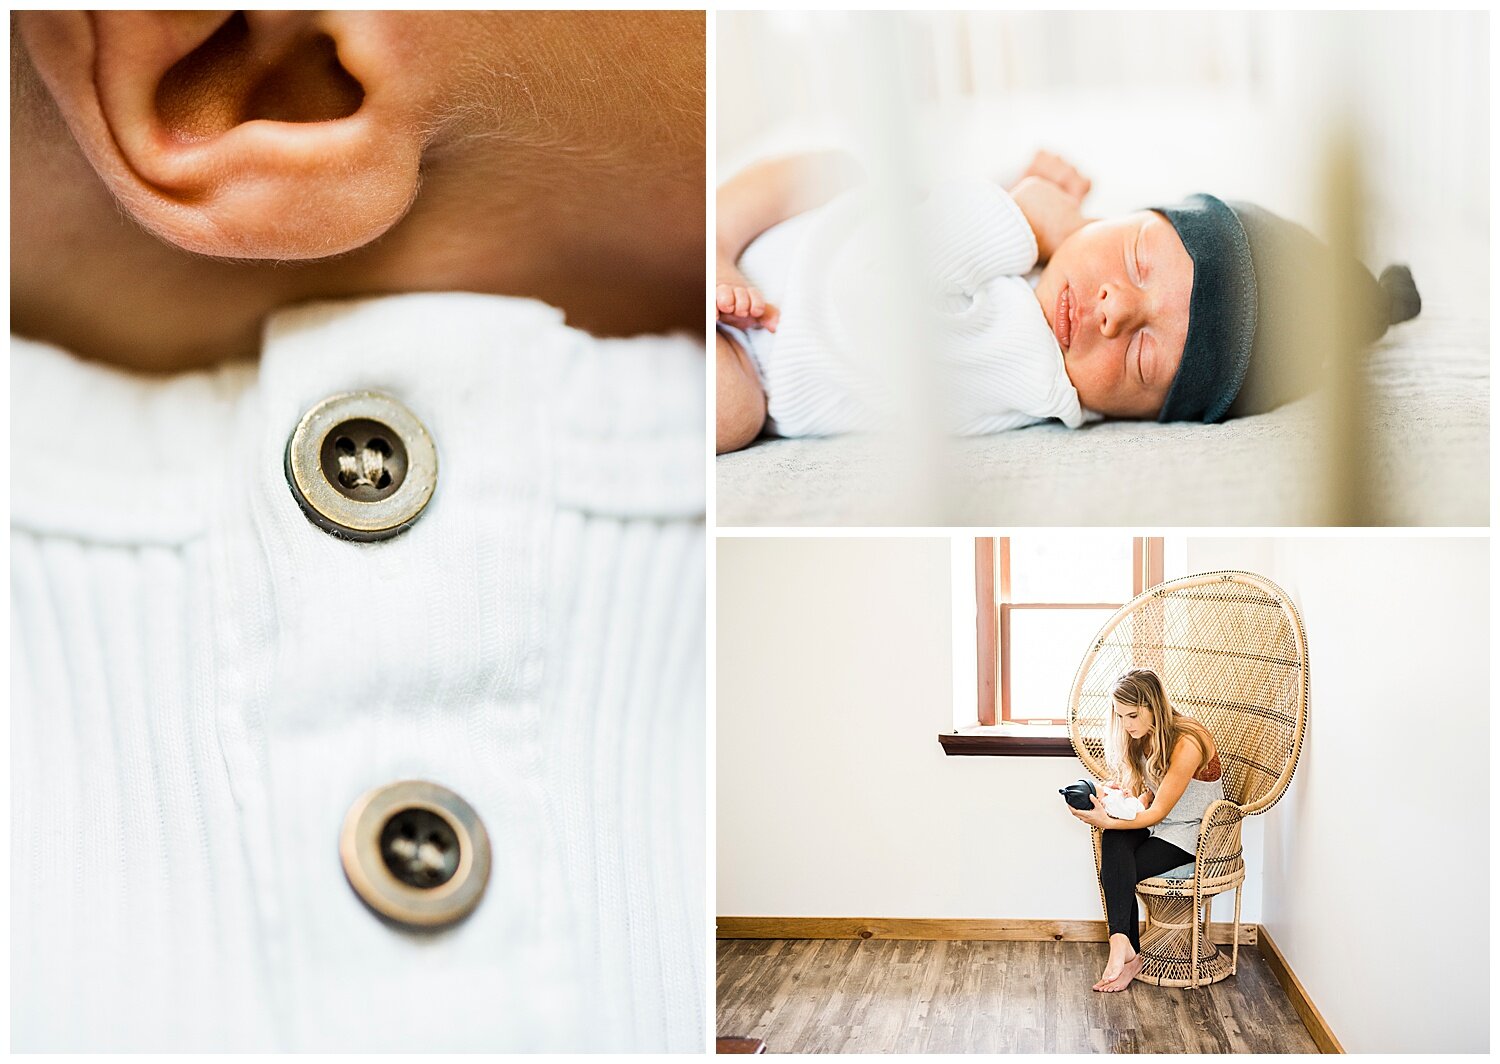 New-Jersey-Newborn-Photography-Lifestyle-In-Home-Session-Photographer-Apollo-Fields-03.jpg